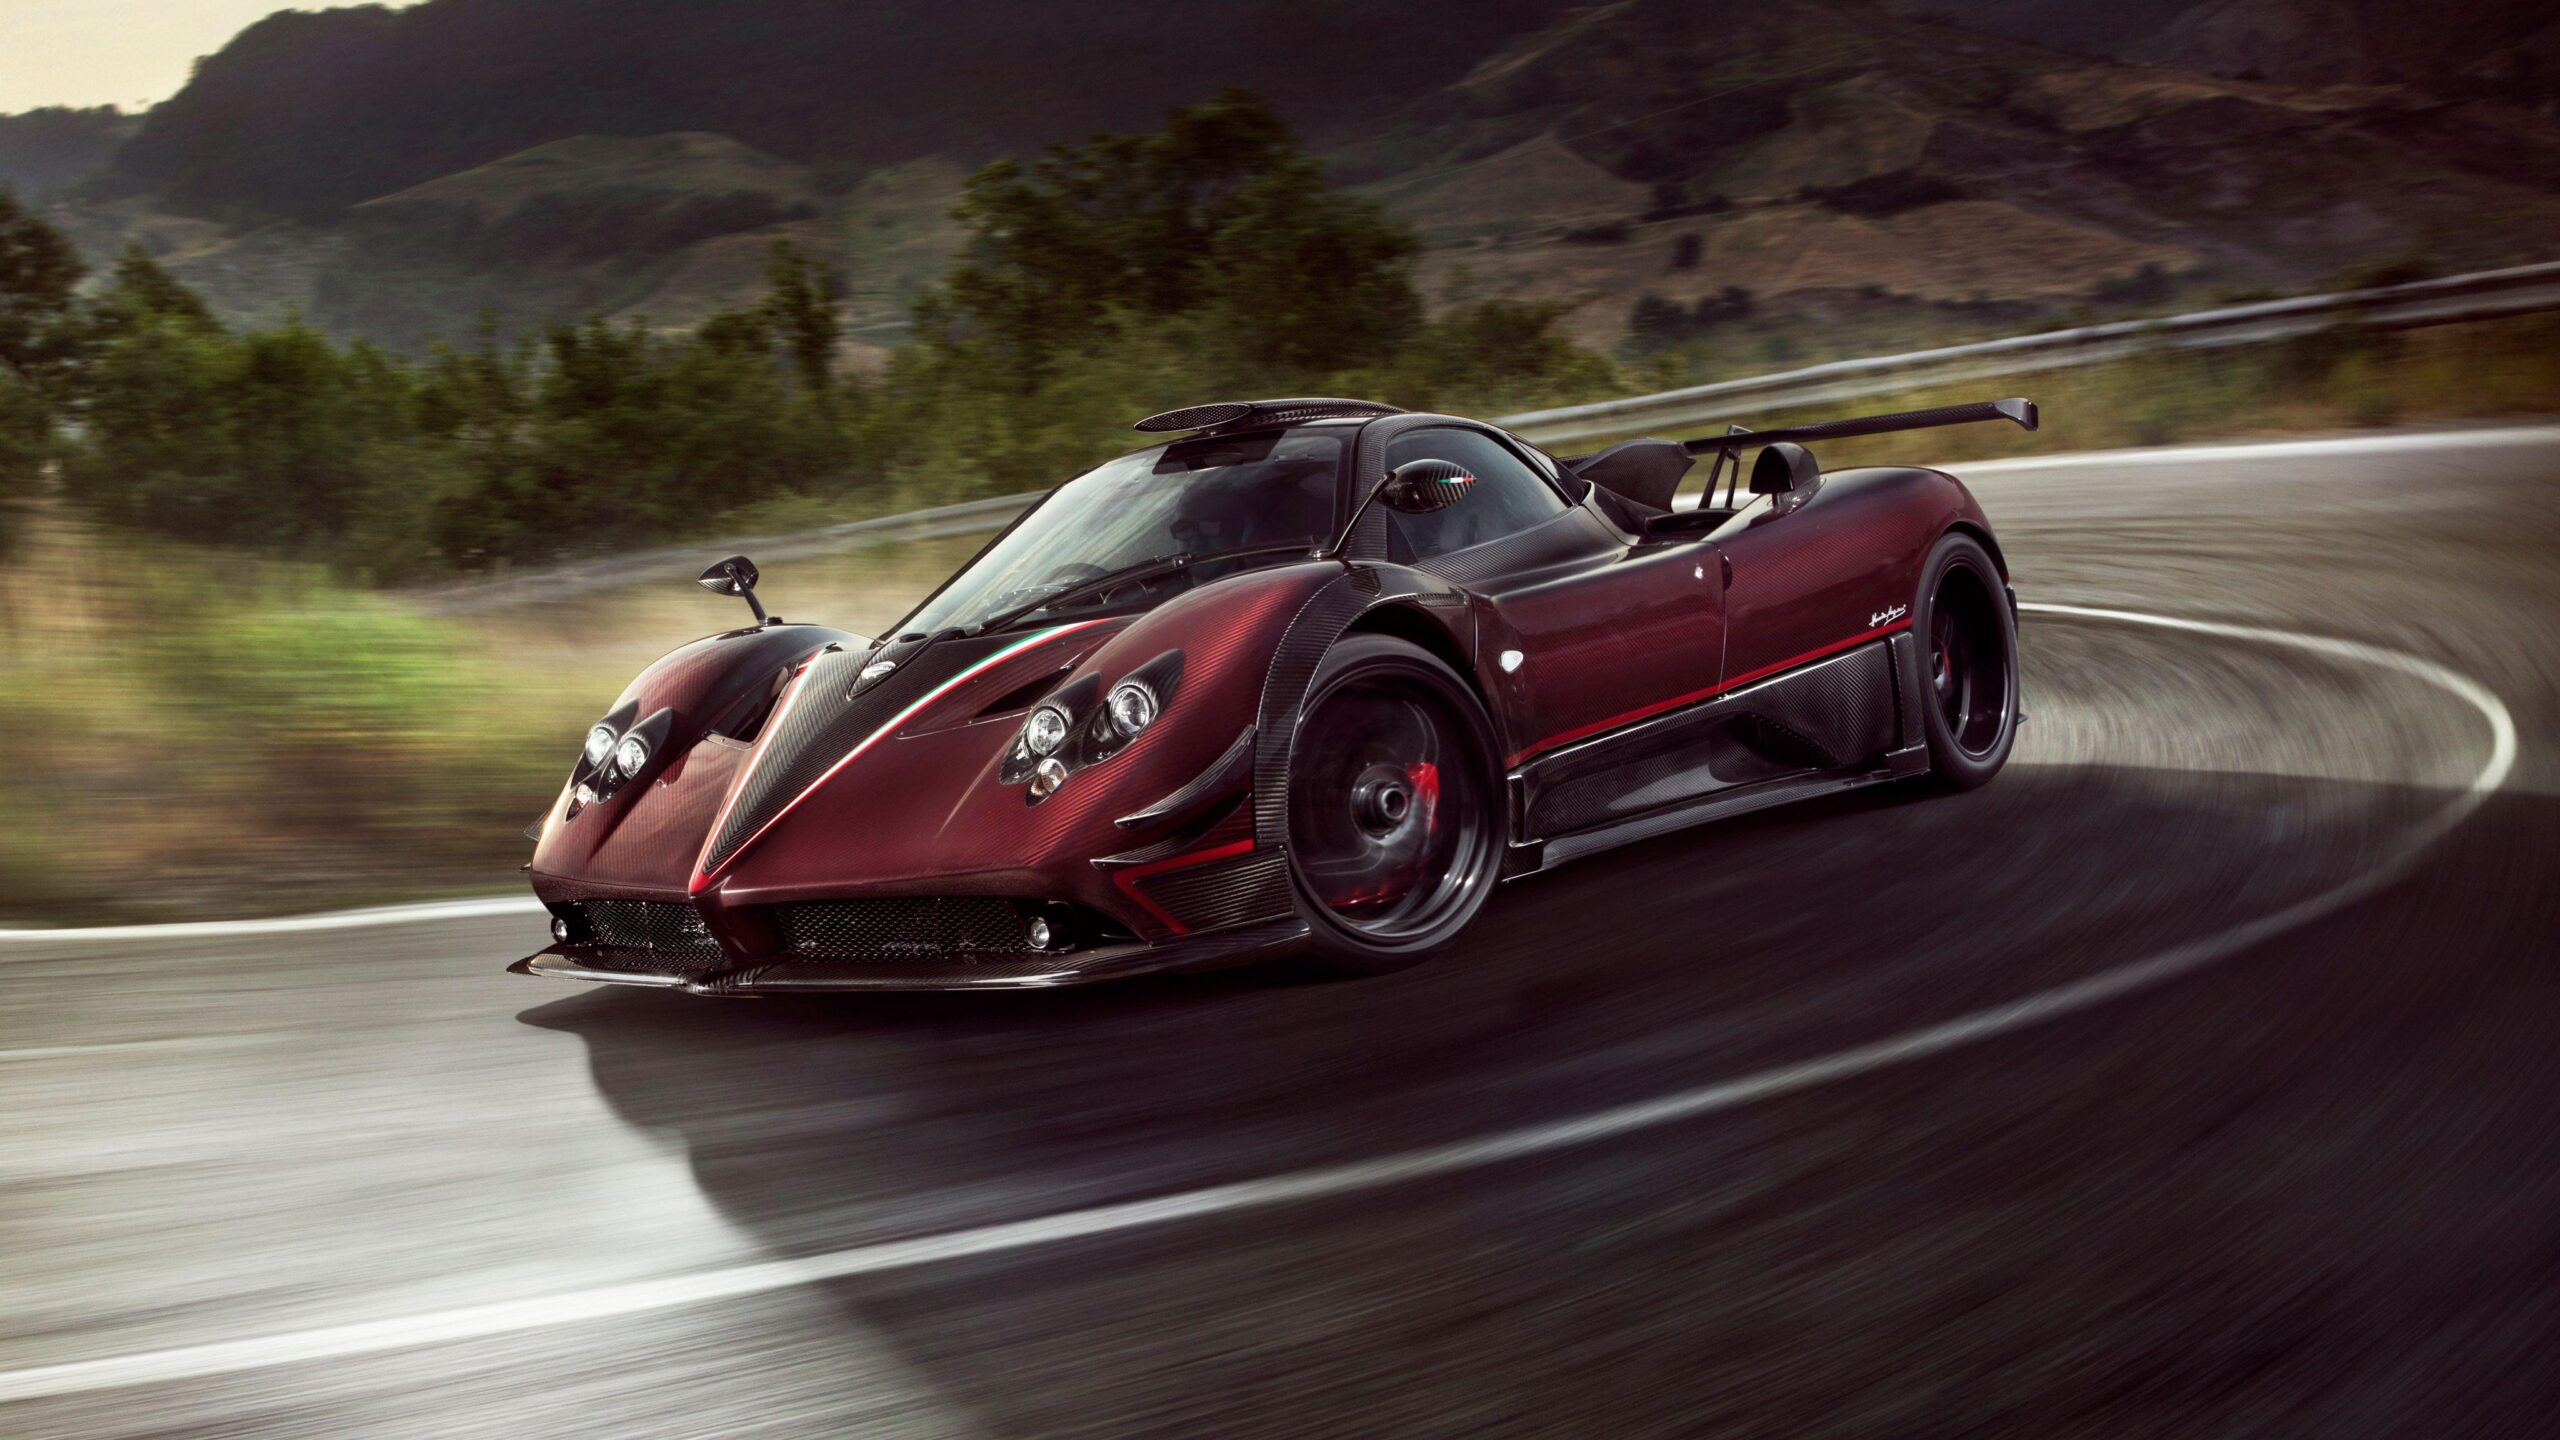 Pagani Car Wallpapers,Pictures